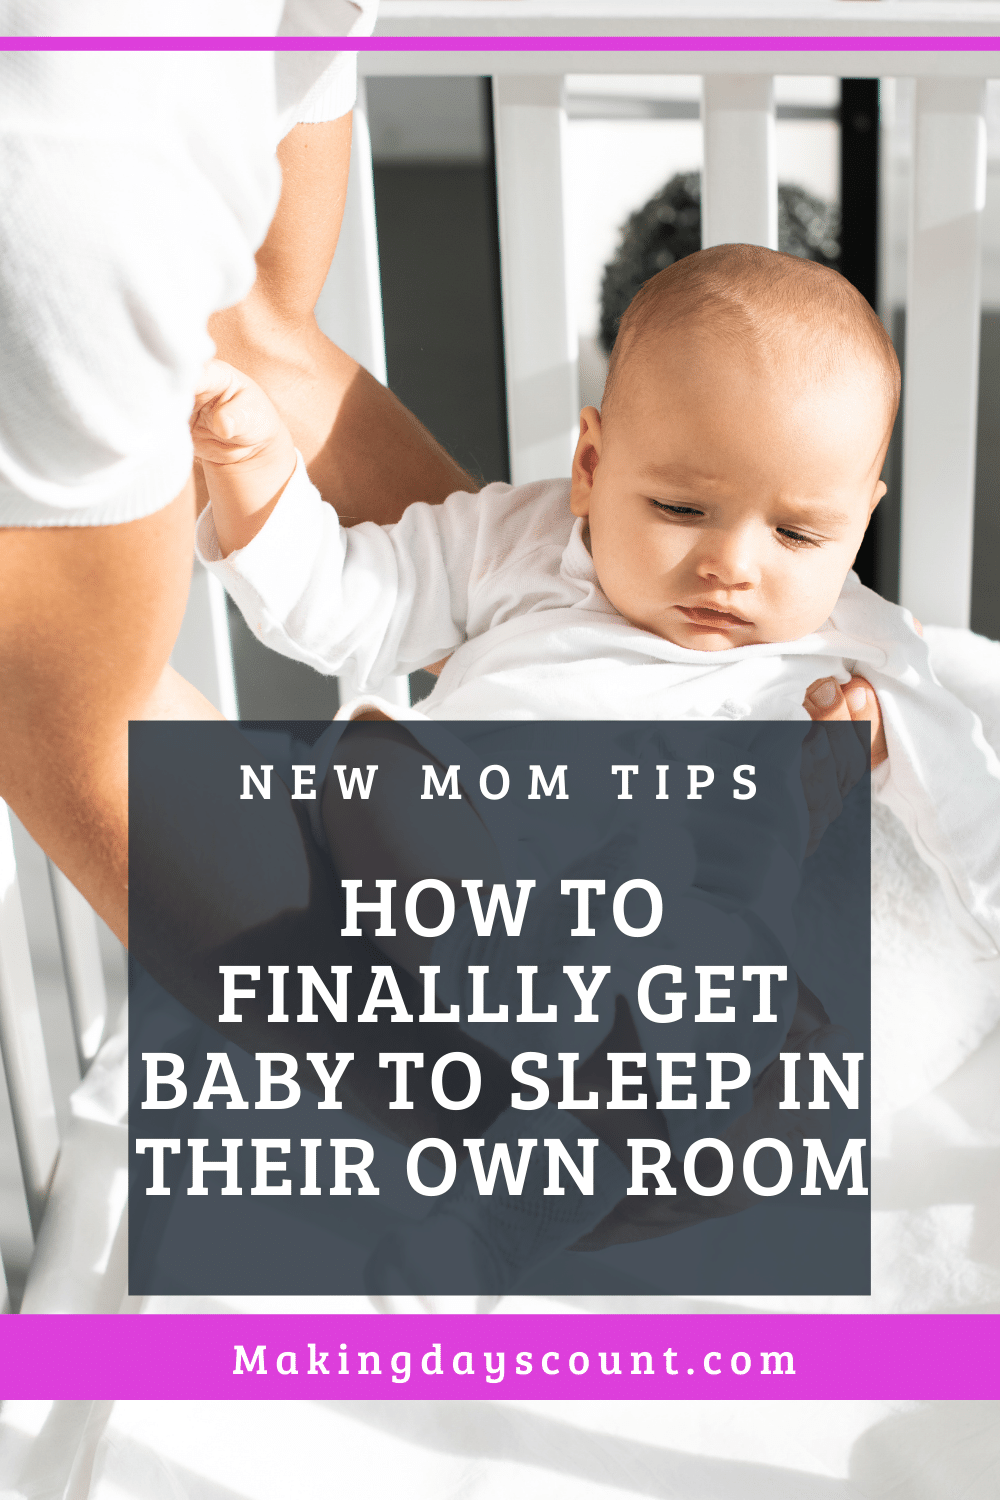 Transition baby to their own room